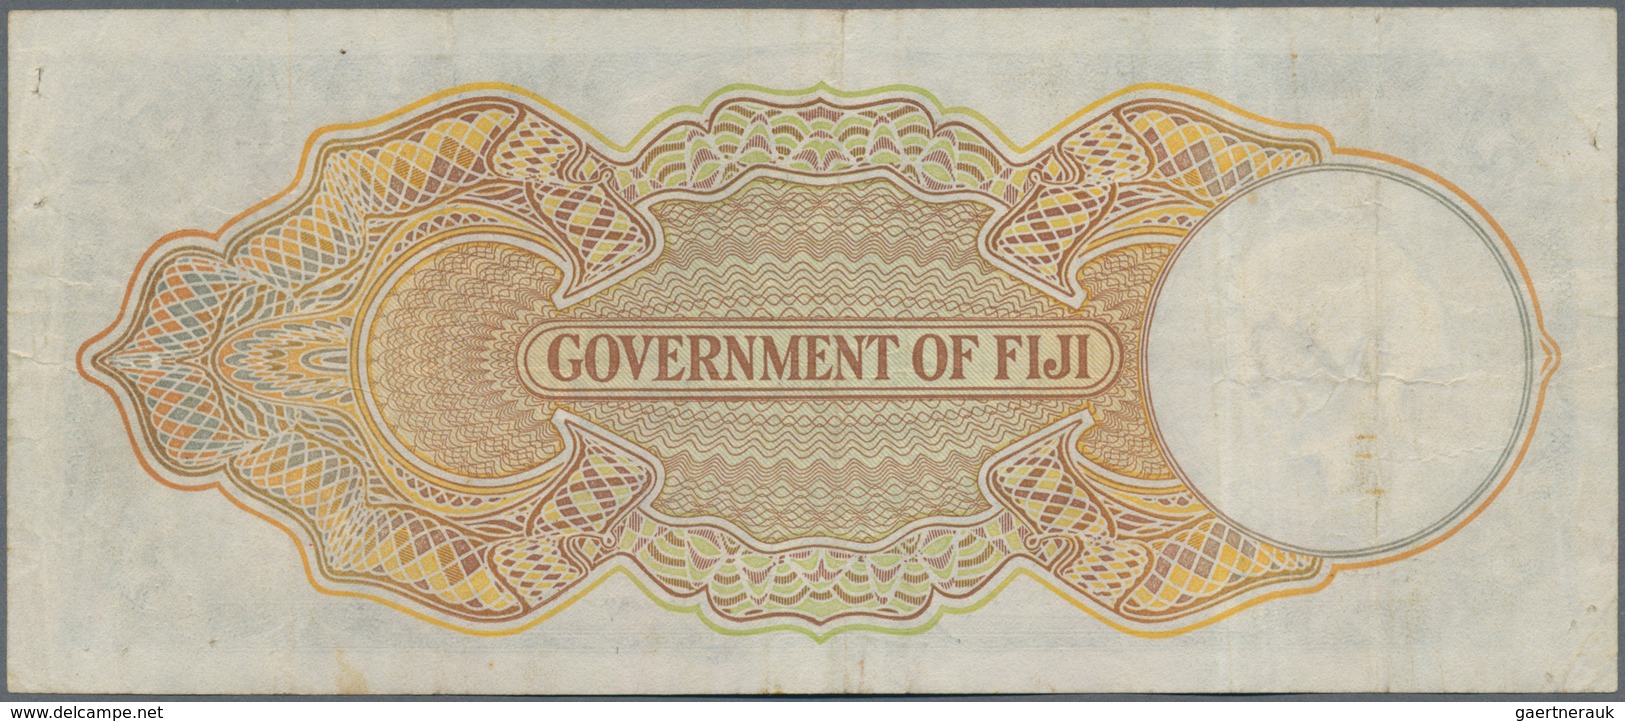 Fiji: 5 Shillings 1938 P. 37b, Used With Light Folds In Paper But No Holes Or Tears, Still Crispness - Fiji